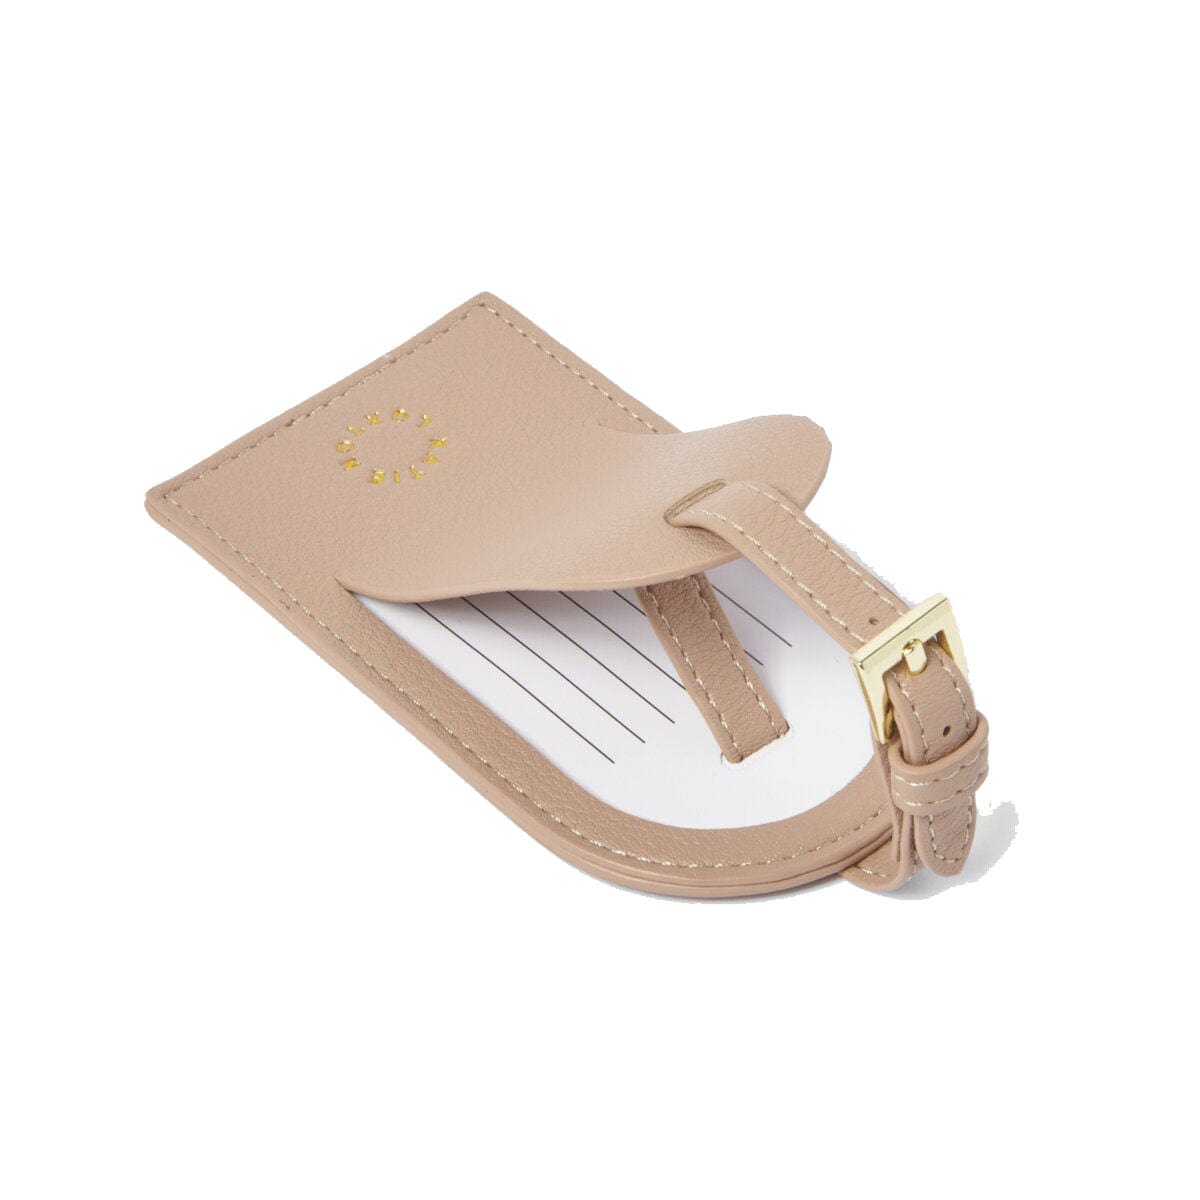 Katie Loxton Travel Accessories Katie Loxton Luggage Tag - Forever Exploring - Soft Tan